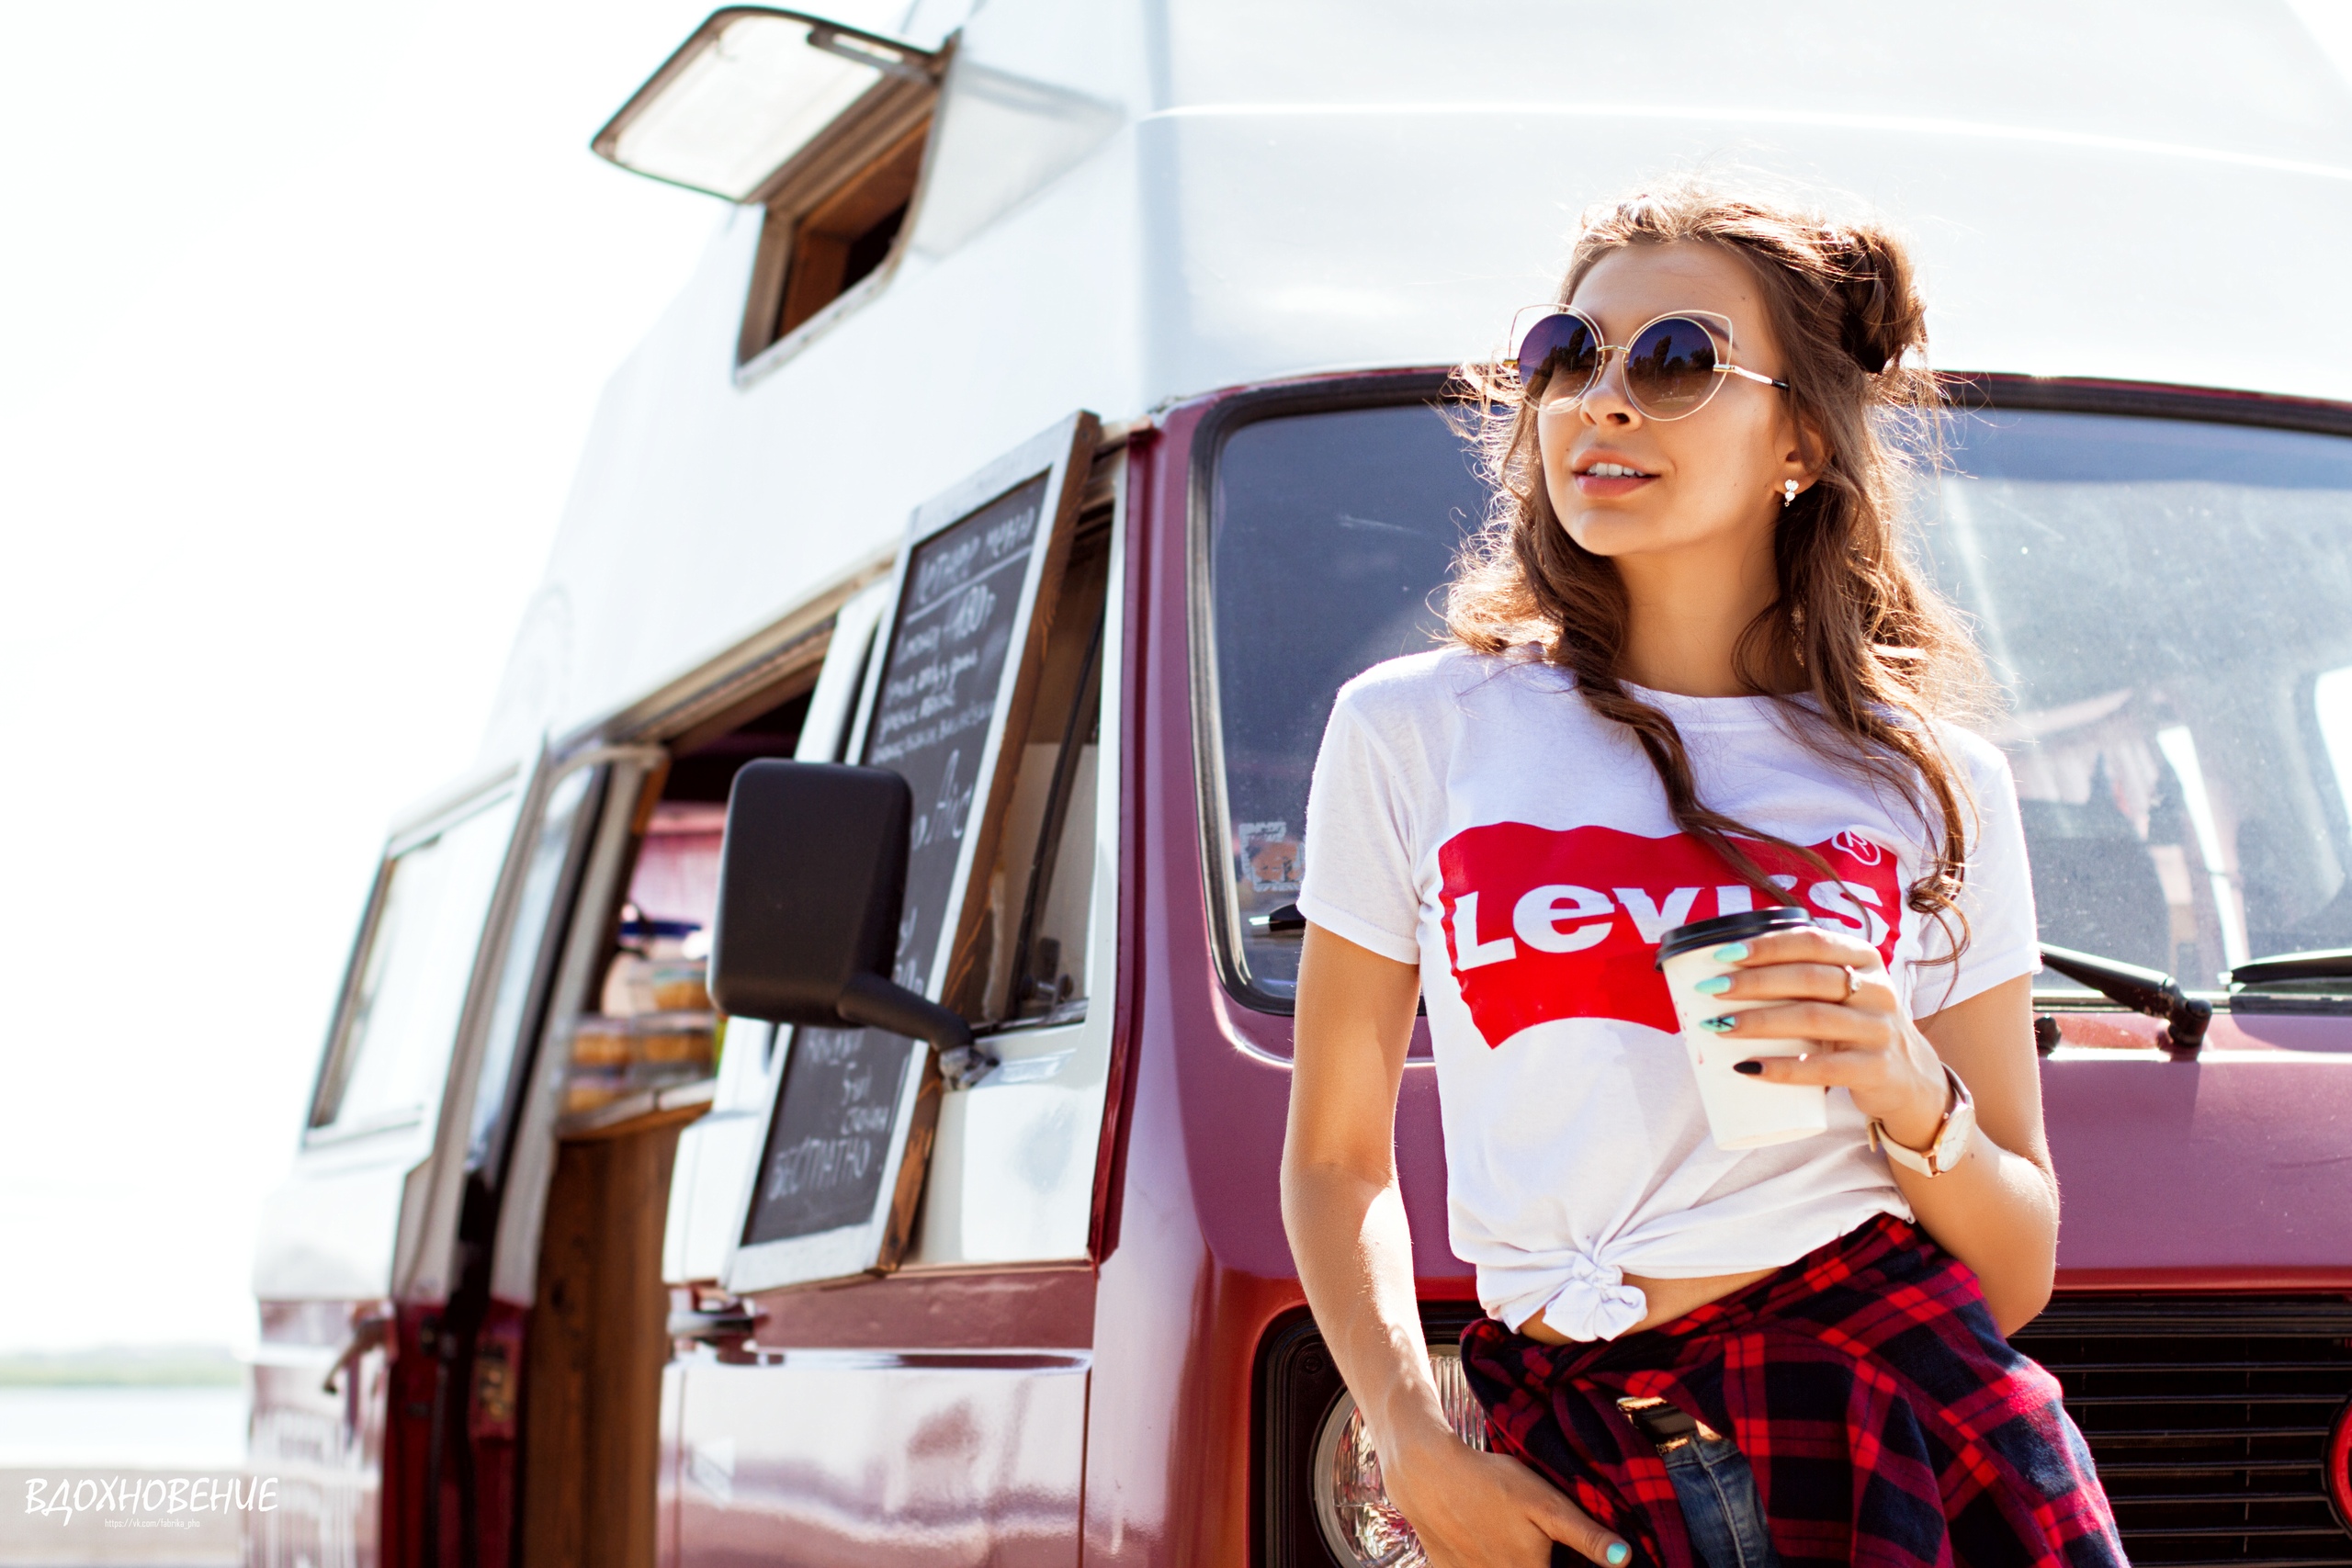 Women Brunette Model Women With Shades Sunglasses T Shirt Van Coffee Levis Smiling Painted Nails Wom 2560x1707